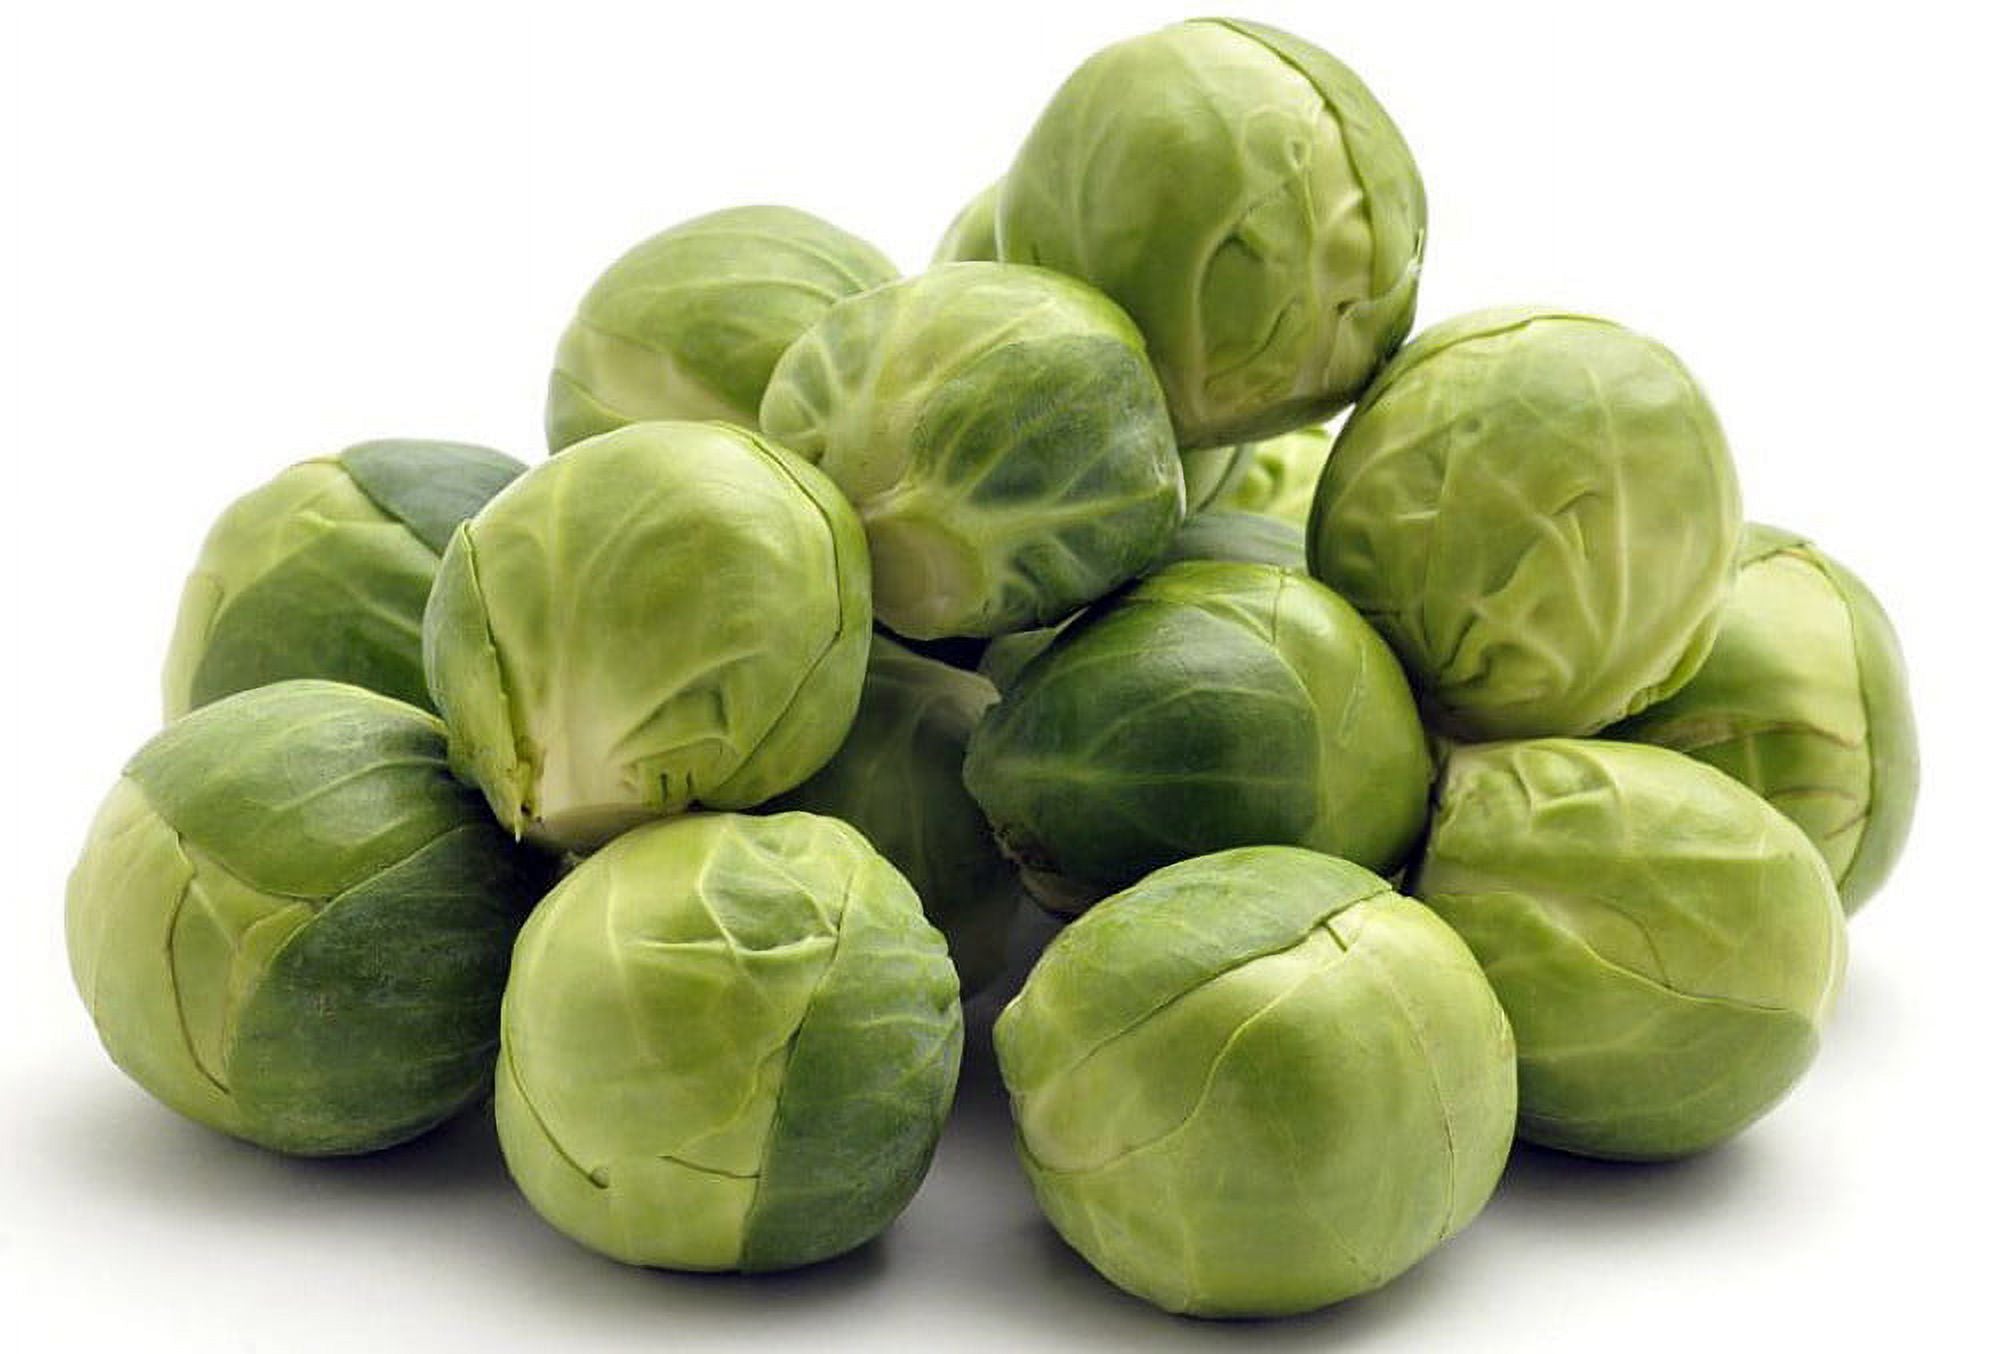 William Dam Brussels Sprouts, Jade Cross Hybrid - Packet